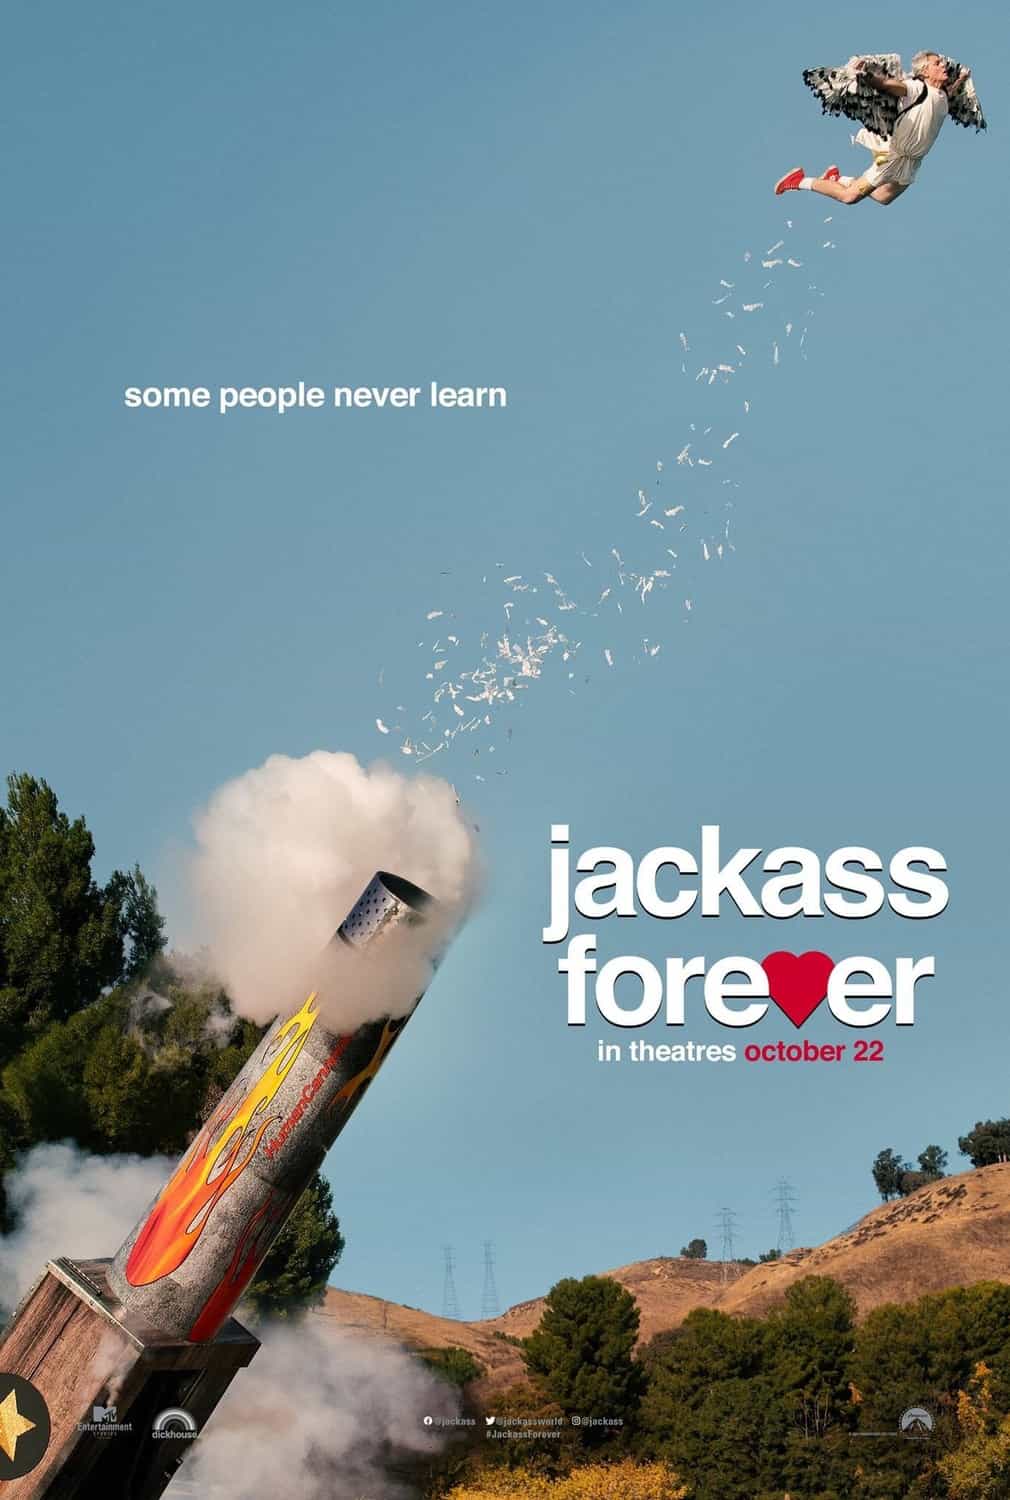 US Box Office Weekend Report 4th - 6th February 2022: Jackass Forever makes its debut at the top of the US box office as the long running series makes its cinematic return